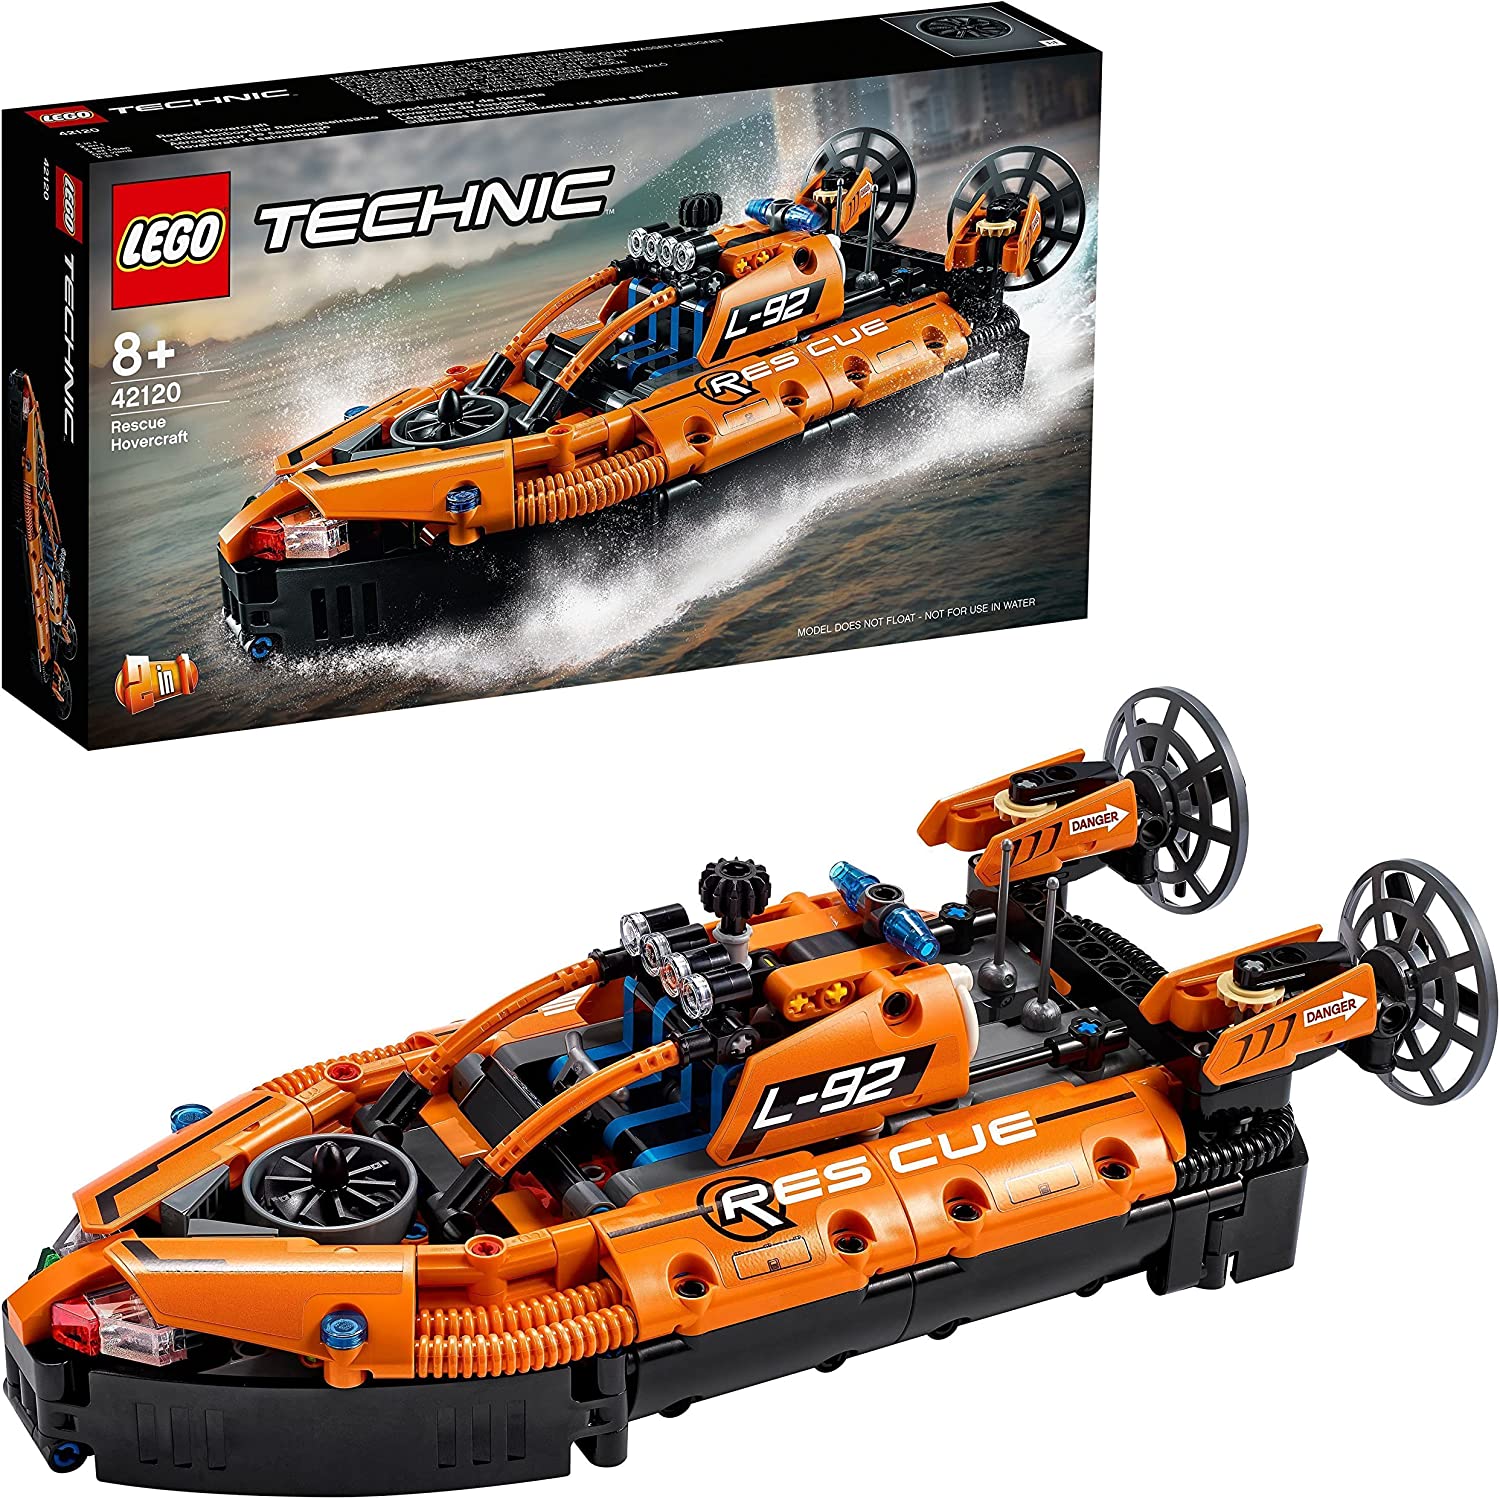 LEGO 42120 Technic Air Cushion Boat for Rescue Operations, 2-in-1 Model, Construction Kit for Boys and Girls, Toy from 8 Years